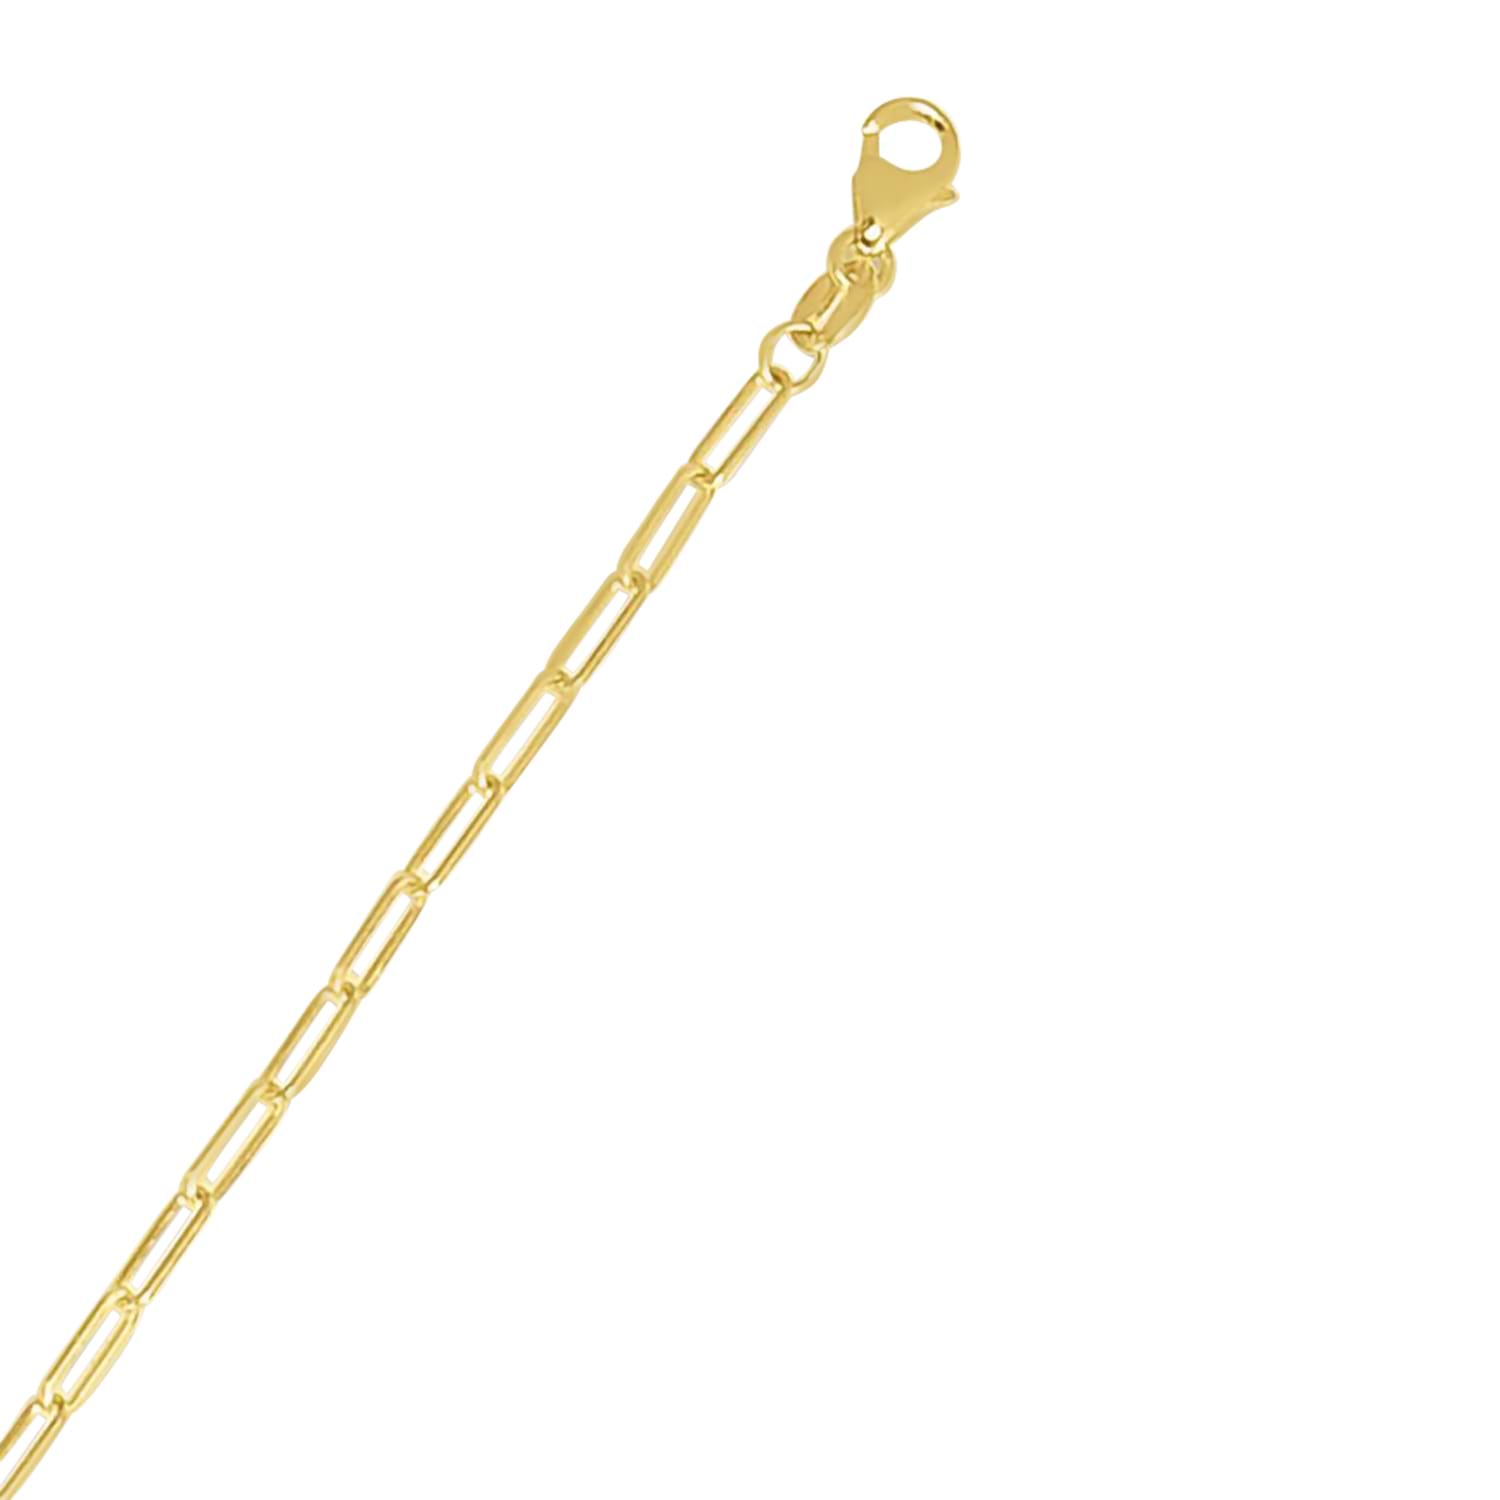 Small Paperclip Link Chain Necklace 14k Yellow Gold (2.1mm)